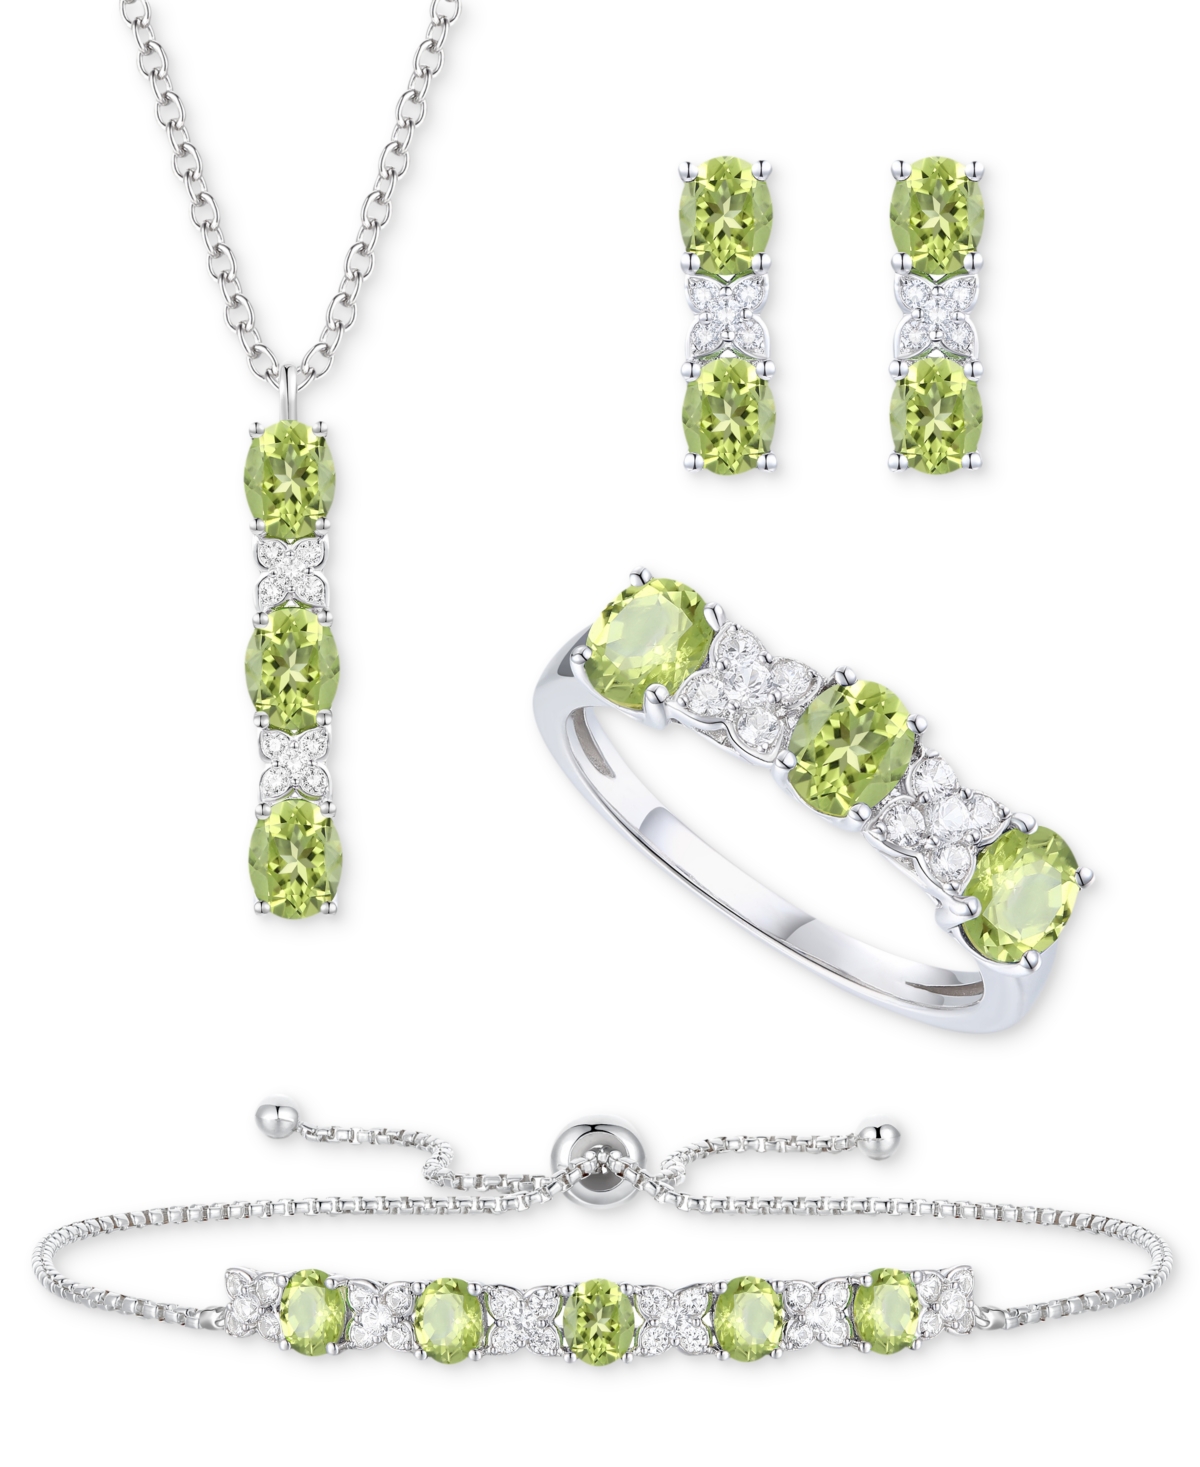 Macy's 5-pc. Set Amethyst (4-5/8 Ct. T.w.) & Lab-grown White Sapphire (3/4 Ct. T.w.) Ring, Pendant Necklace In Peridot